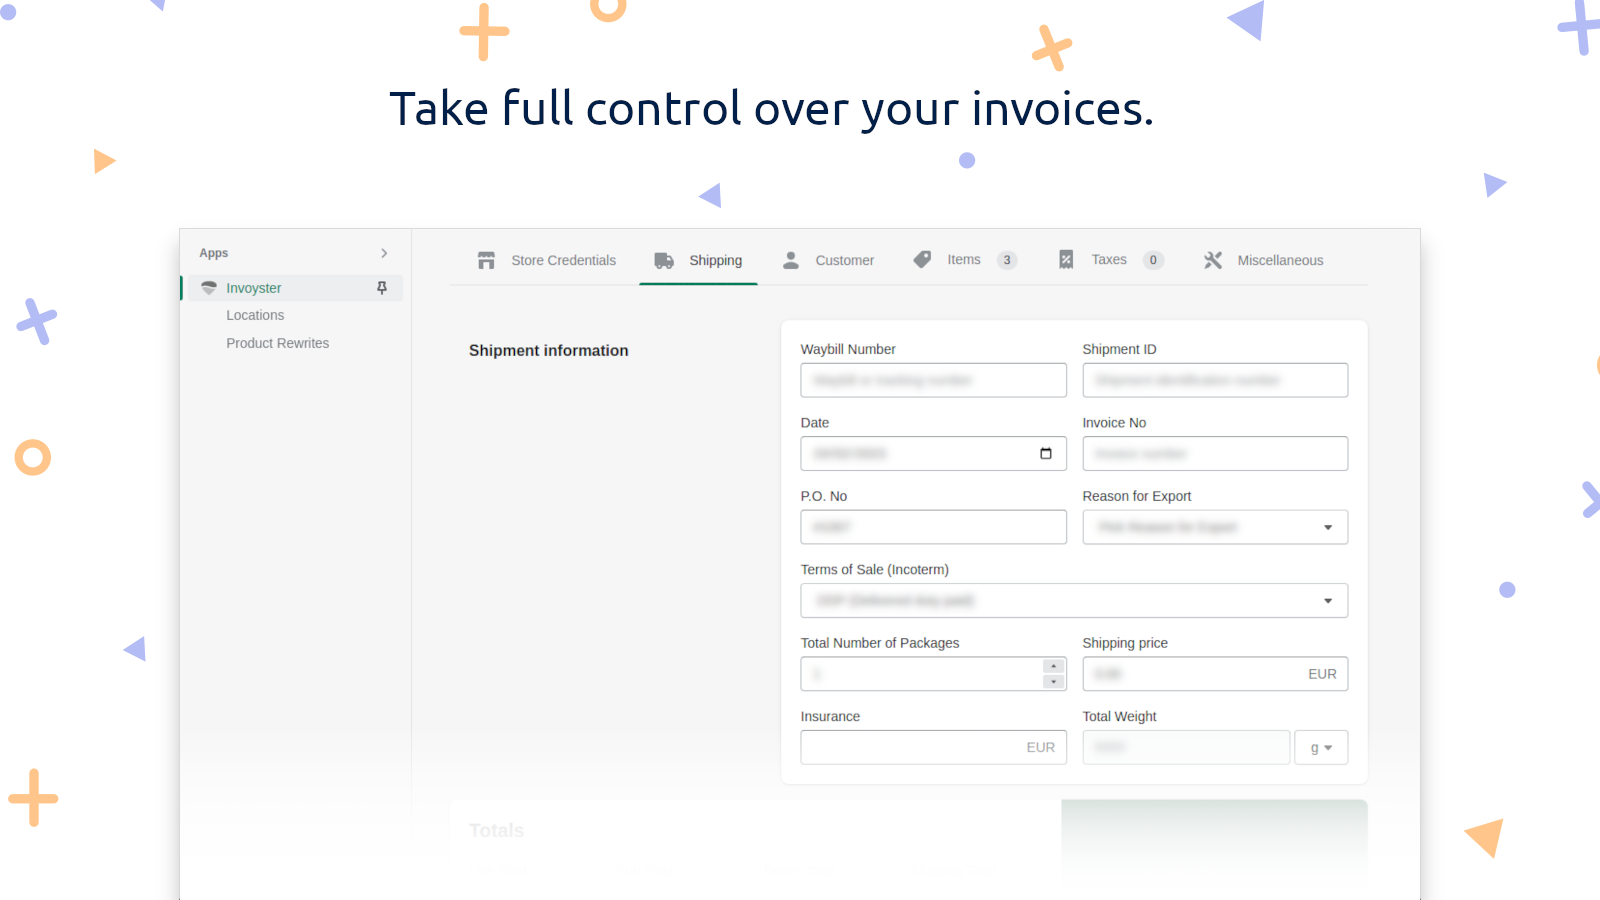 Take full control over your invoices